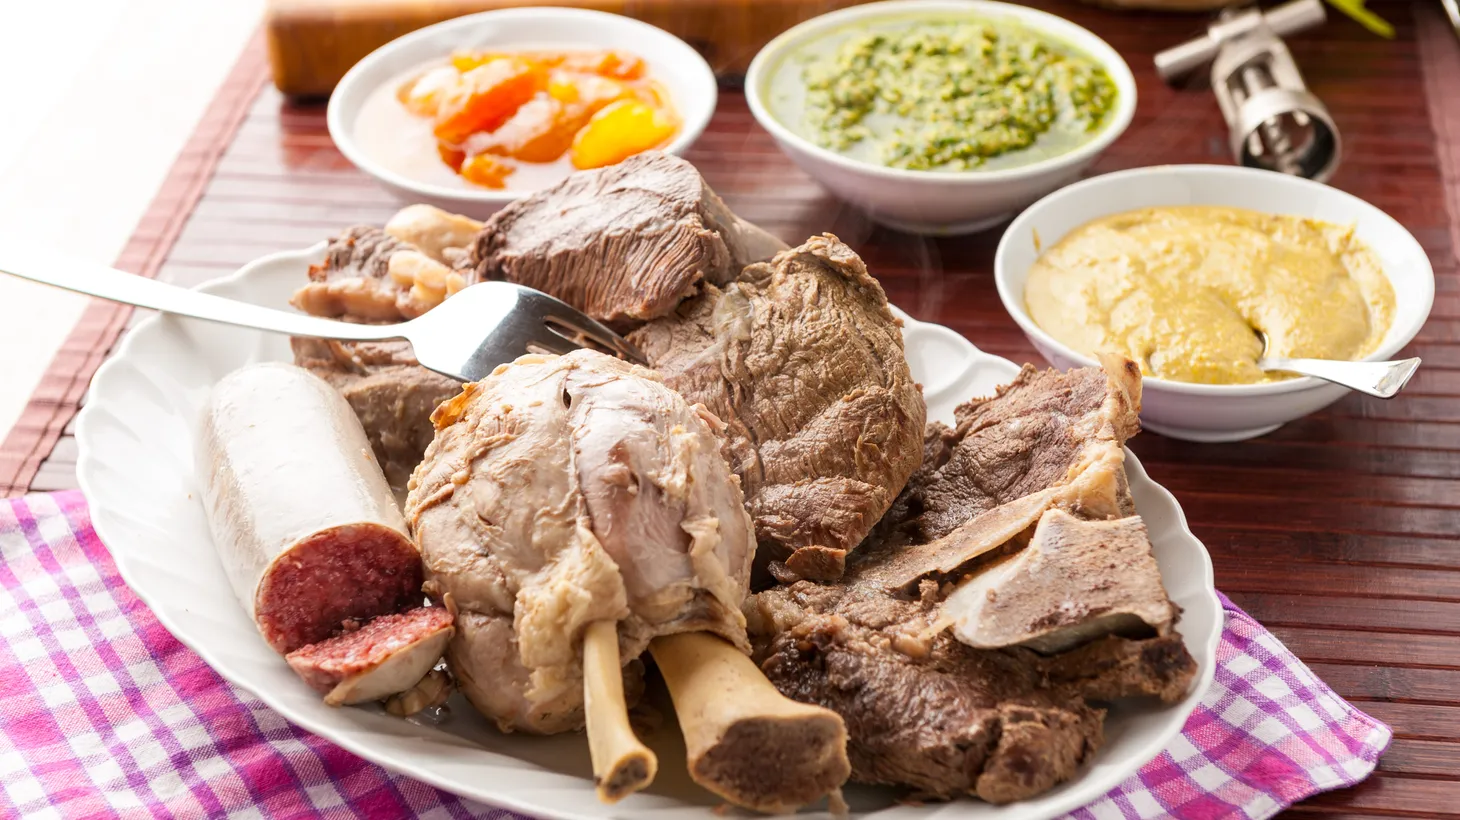 Bollito misto is the Italian dish of mixed boiled meats accompanied by zesty sauces.